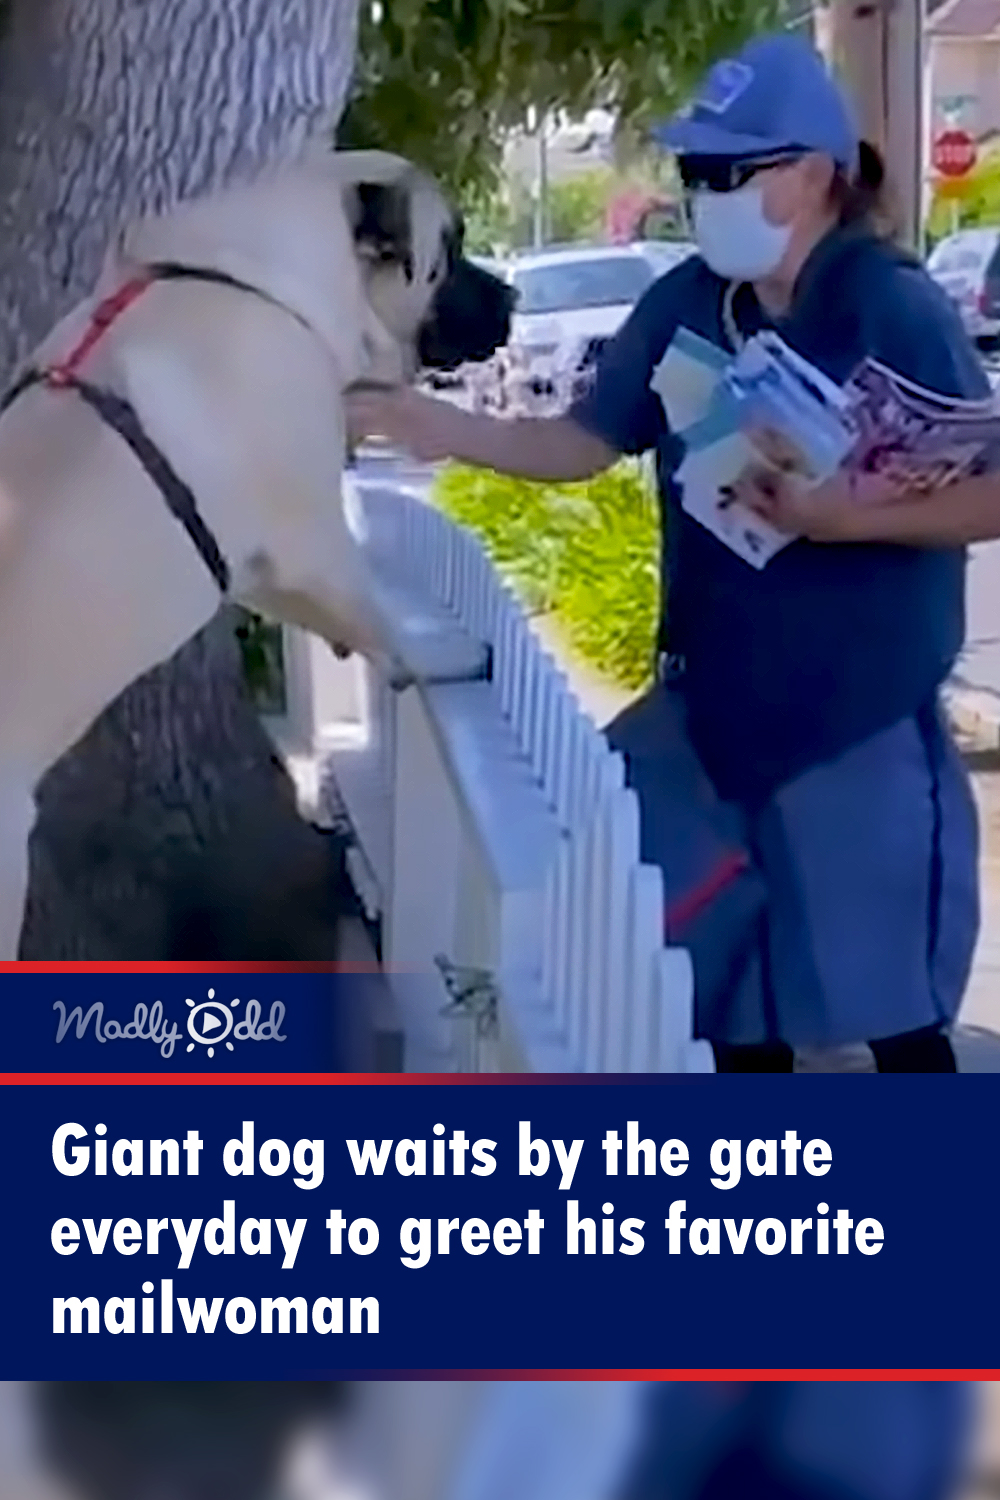 Giant dog waits by the gate everyday to greet his favorite mailwoman